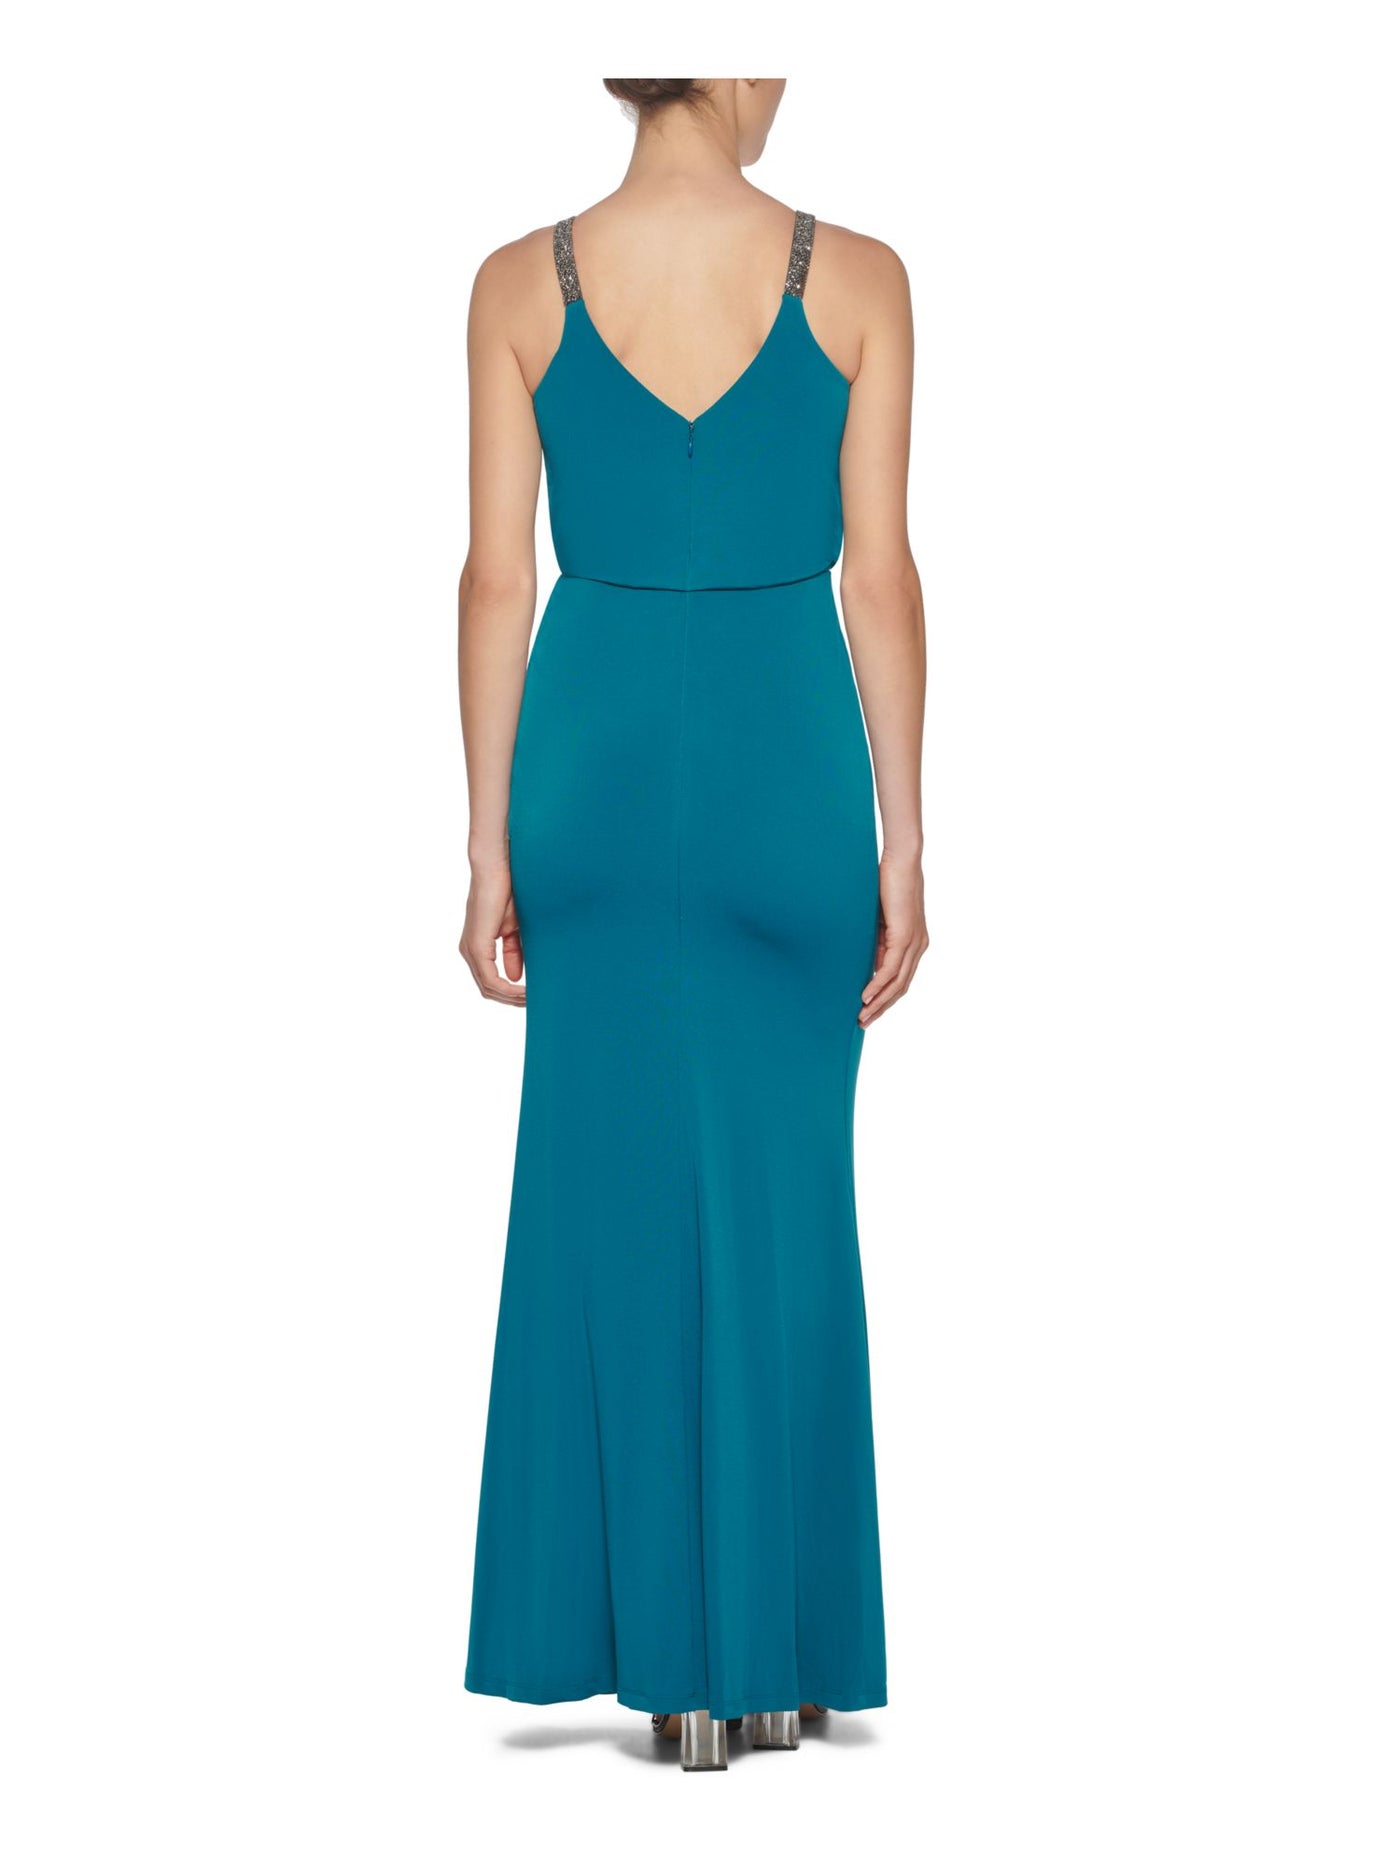 CALVIN KLEIN Womens Teal Stretch Ruched Zippered Embellished Straps Jersey-knit Spaghetti Strap Surplice Neckline Full-Length Cocktail Gown Dress 10